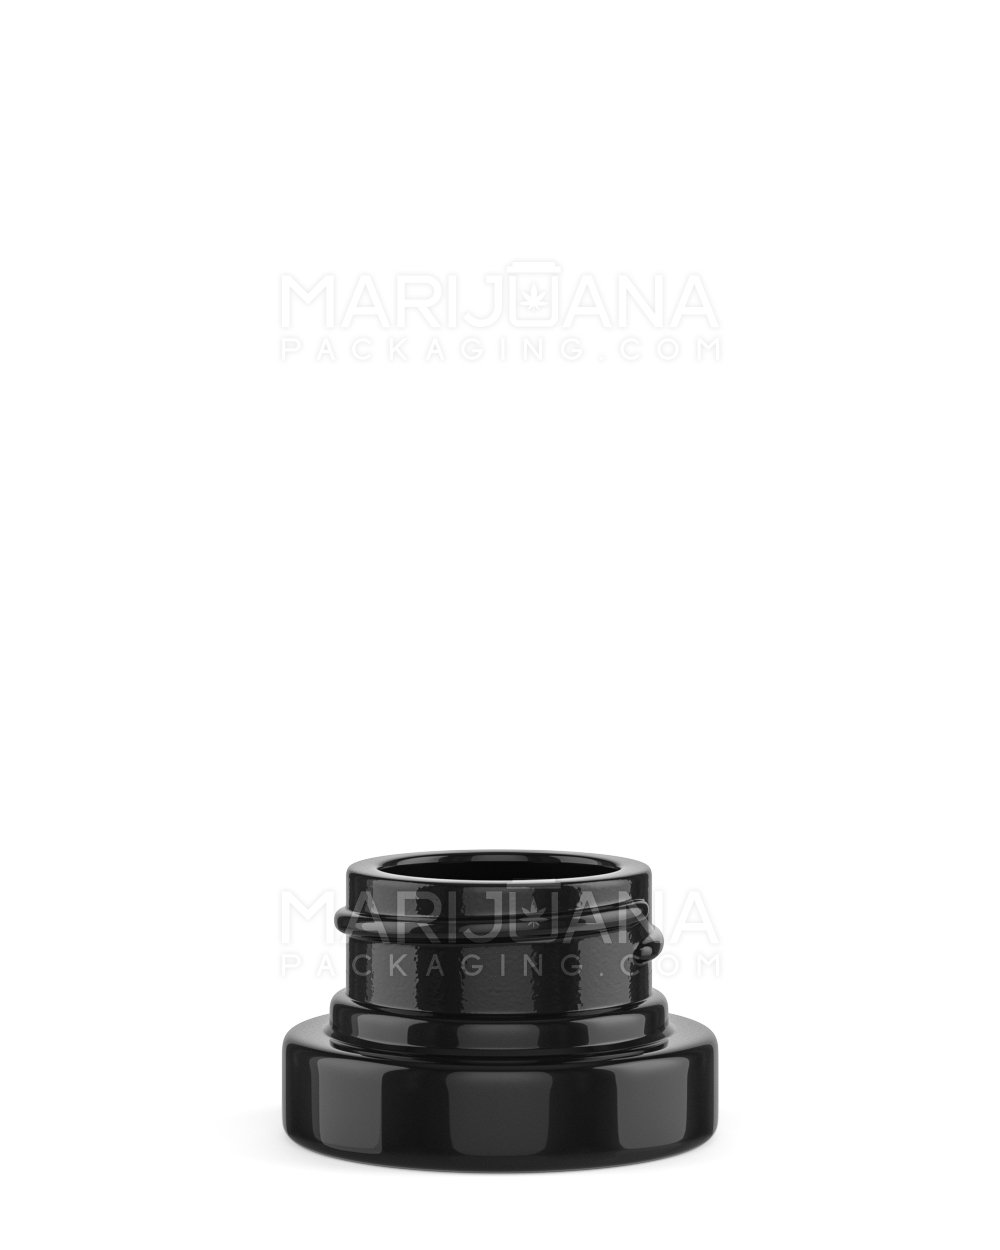 Glossy Black Glass Concentrate Containers | 28mm - 5mL - 504 Count - 1